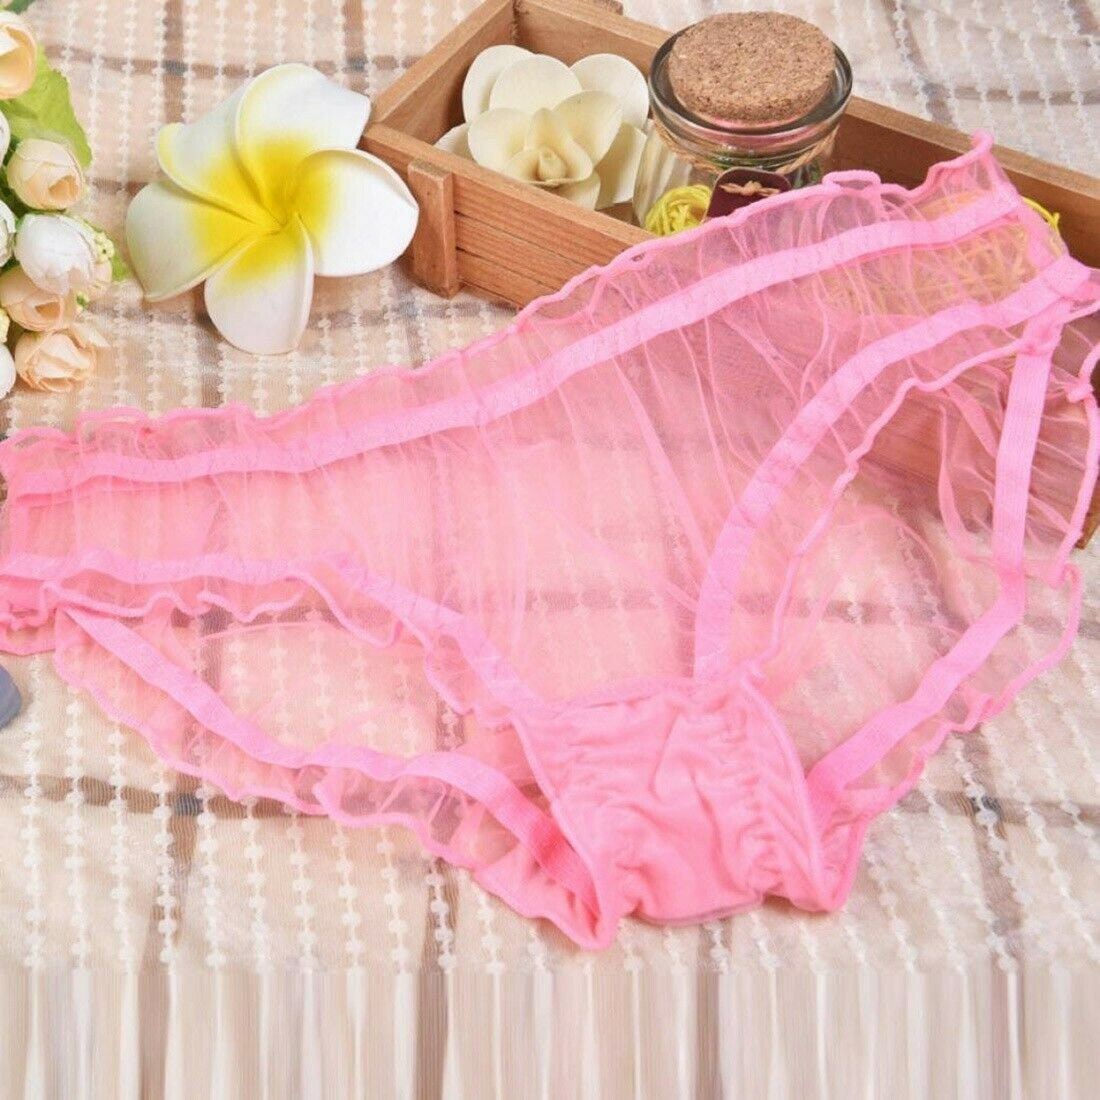 Vintage Style Completely Sheer Transparent Nylon Panties Retro Look Sexy  NEW 